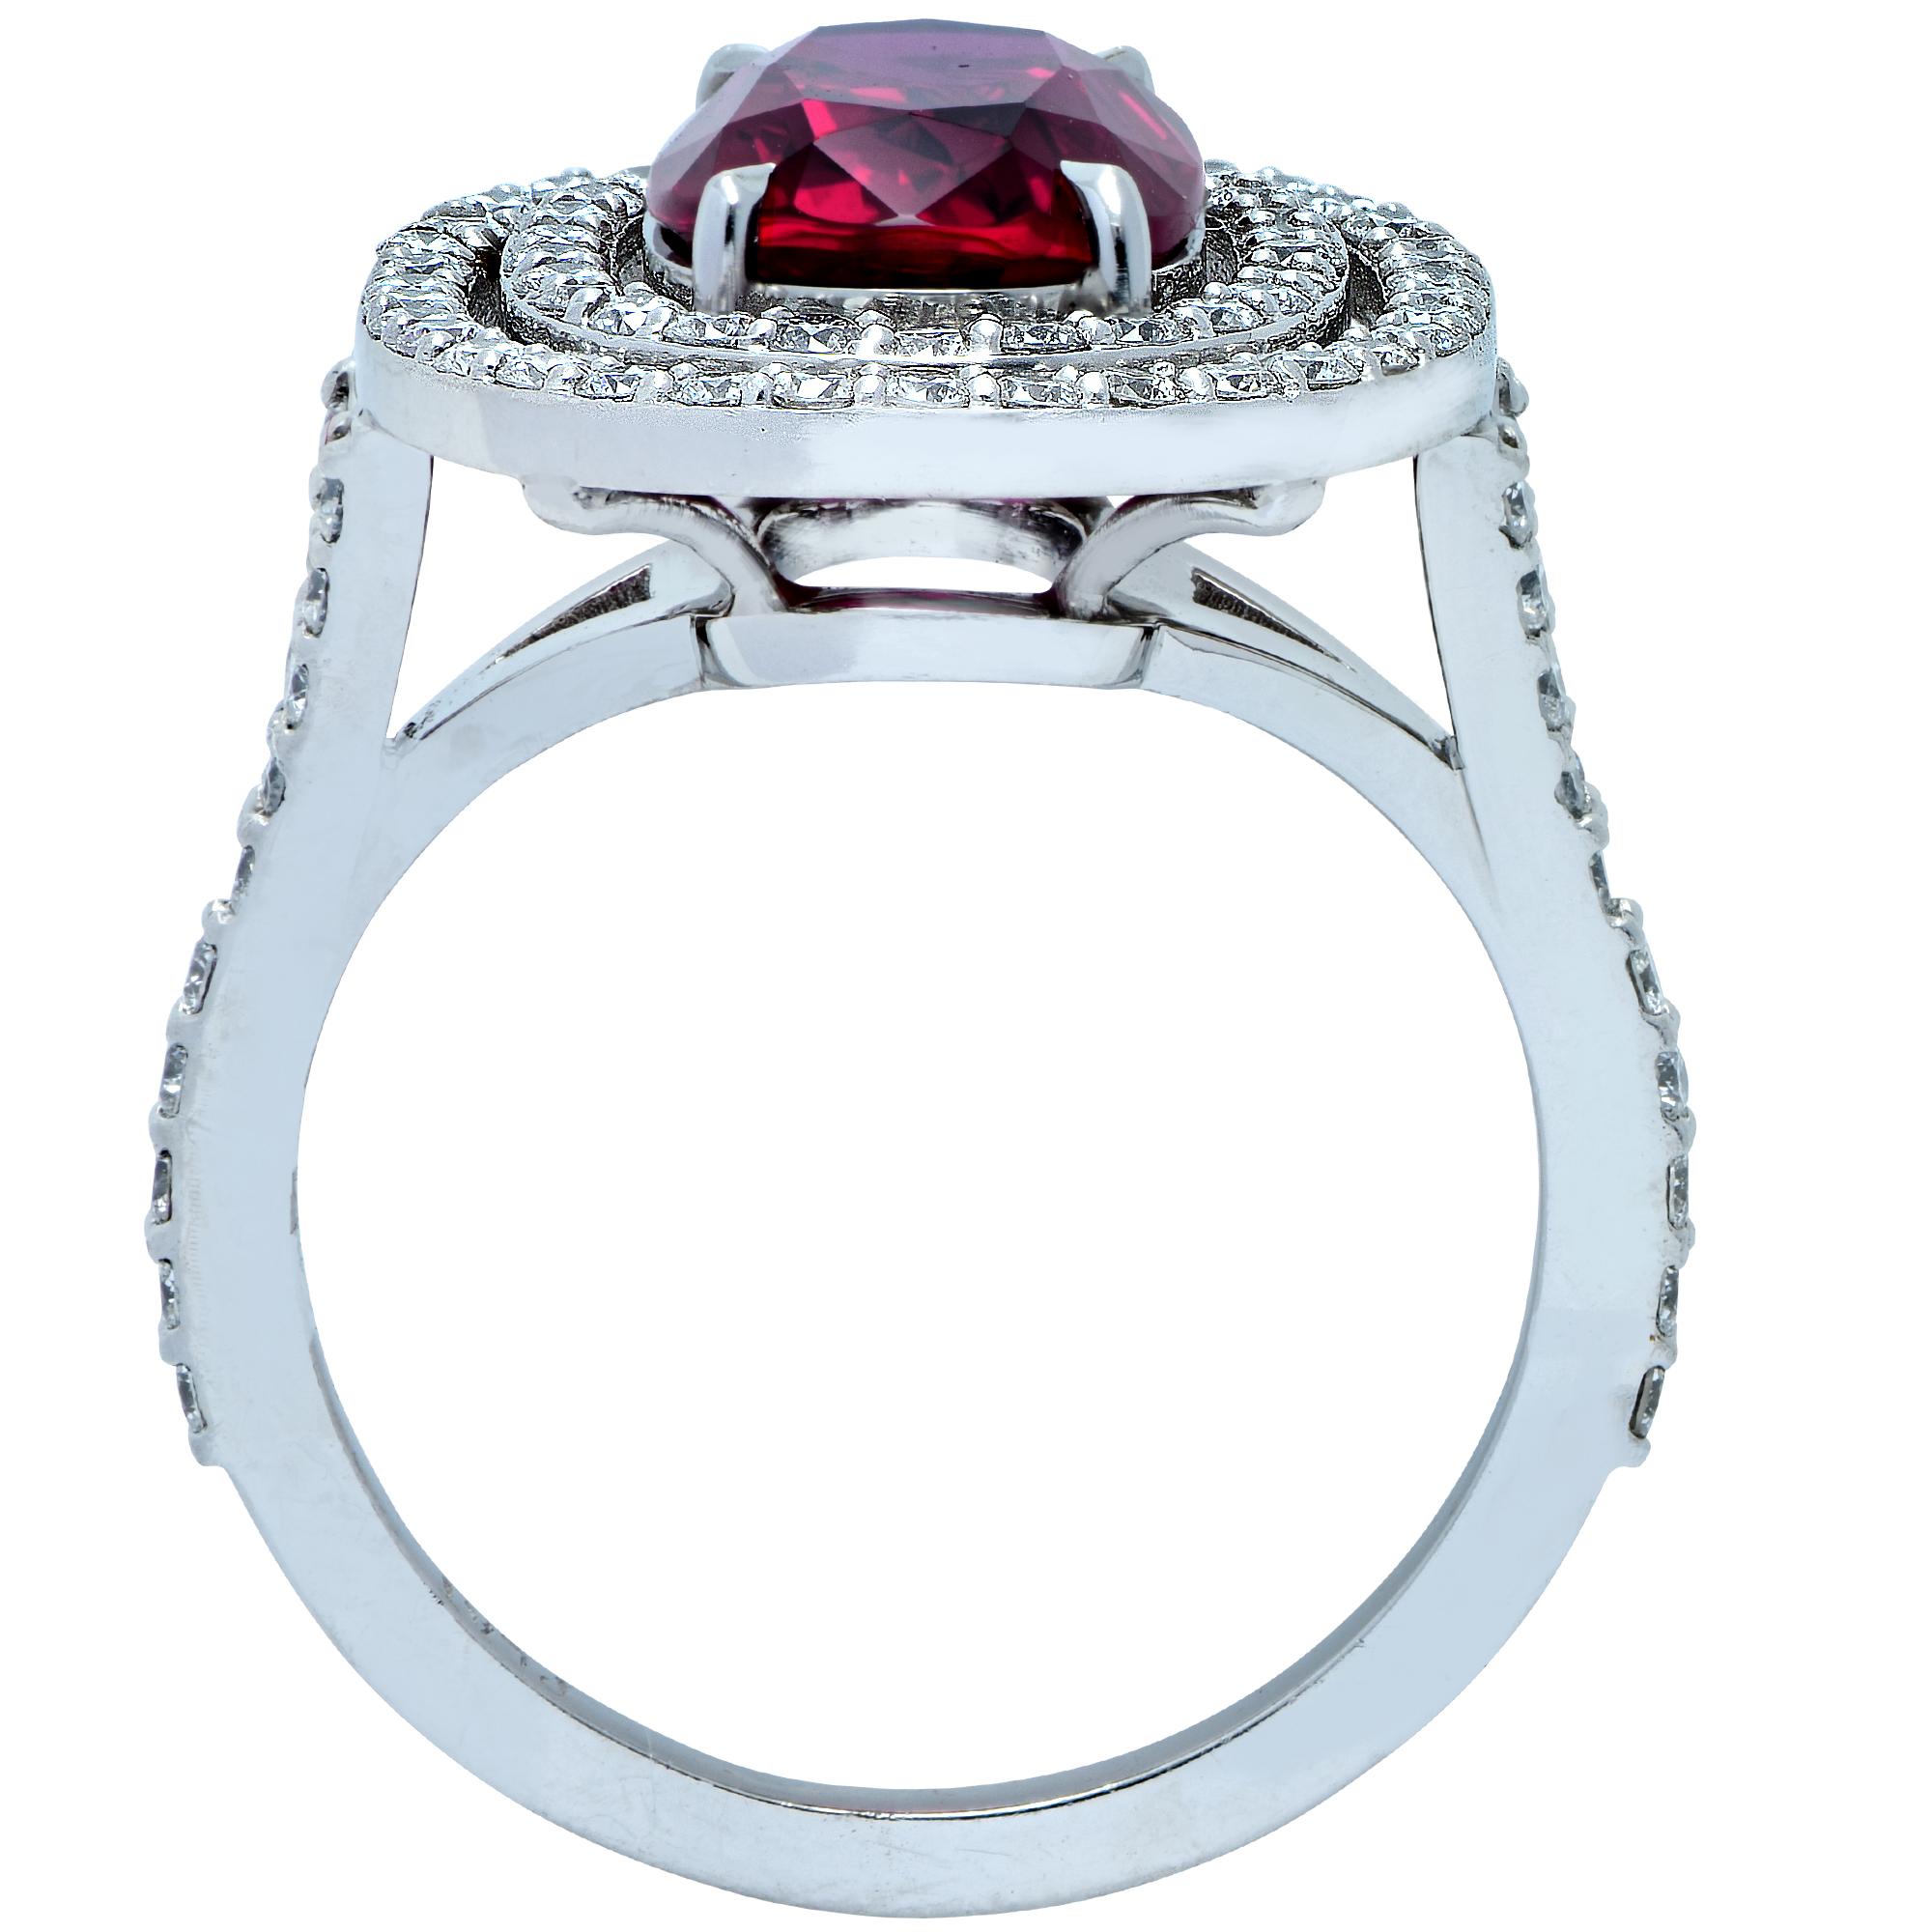 Stunning double halo ring crafted in platinum, showcasing a gorgeous AGL Certified oval ruby weighing  3.26 carats, adorned with 90 round brilliant cut diamonds weighing approximately .90 carats total weight, G color VS clarity. The spectacular ruby